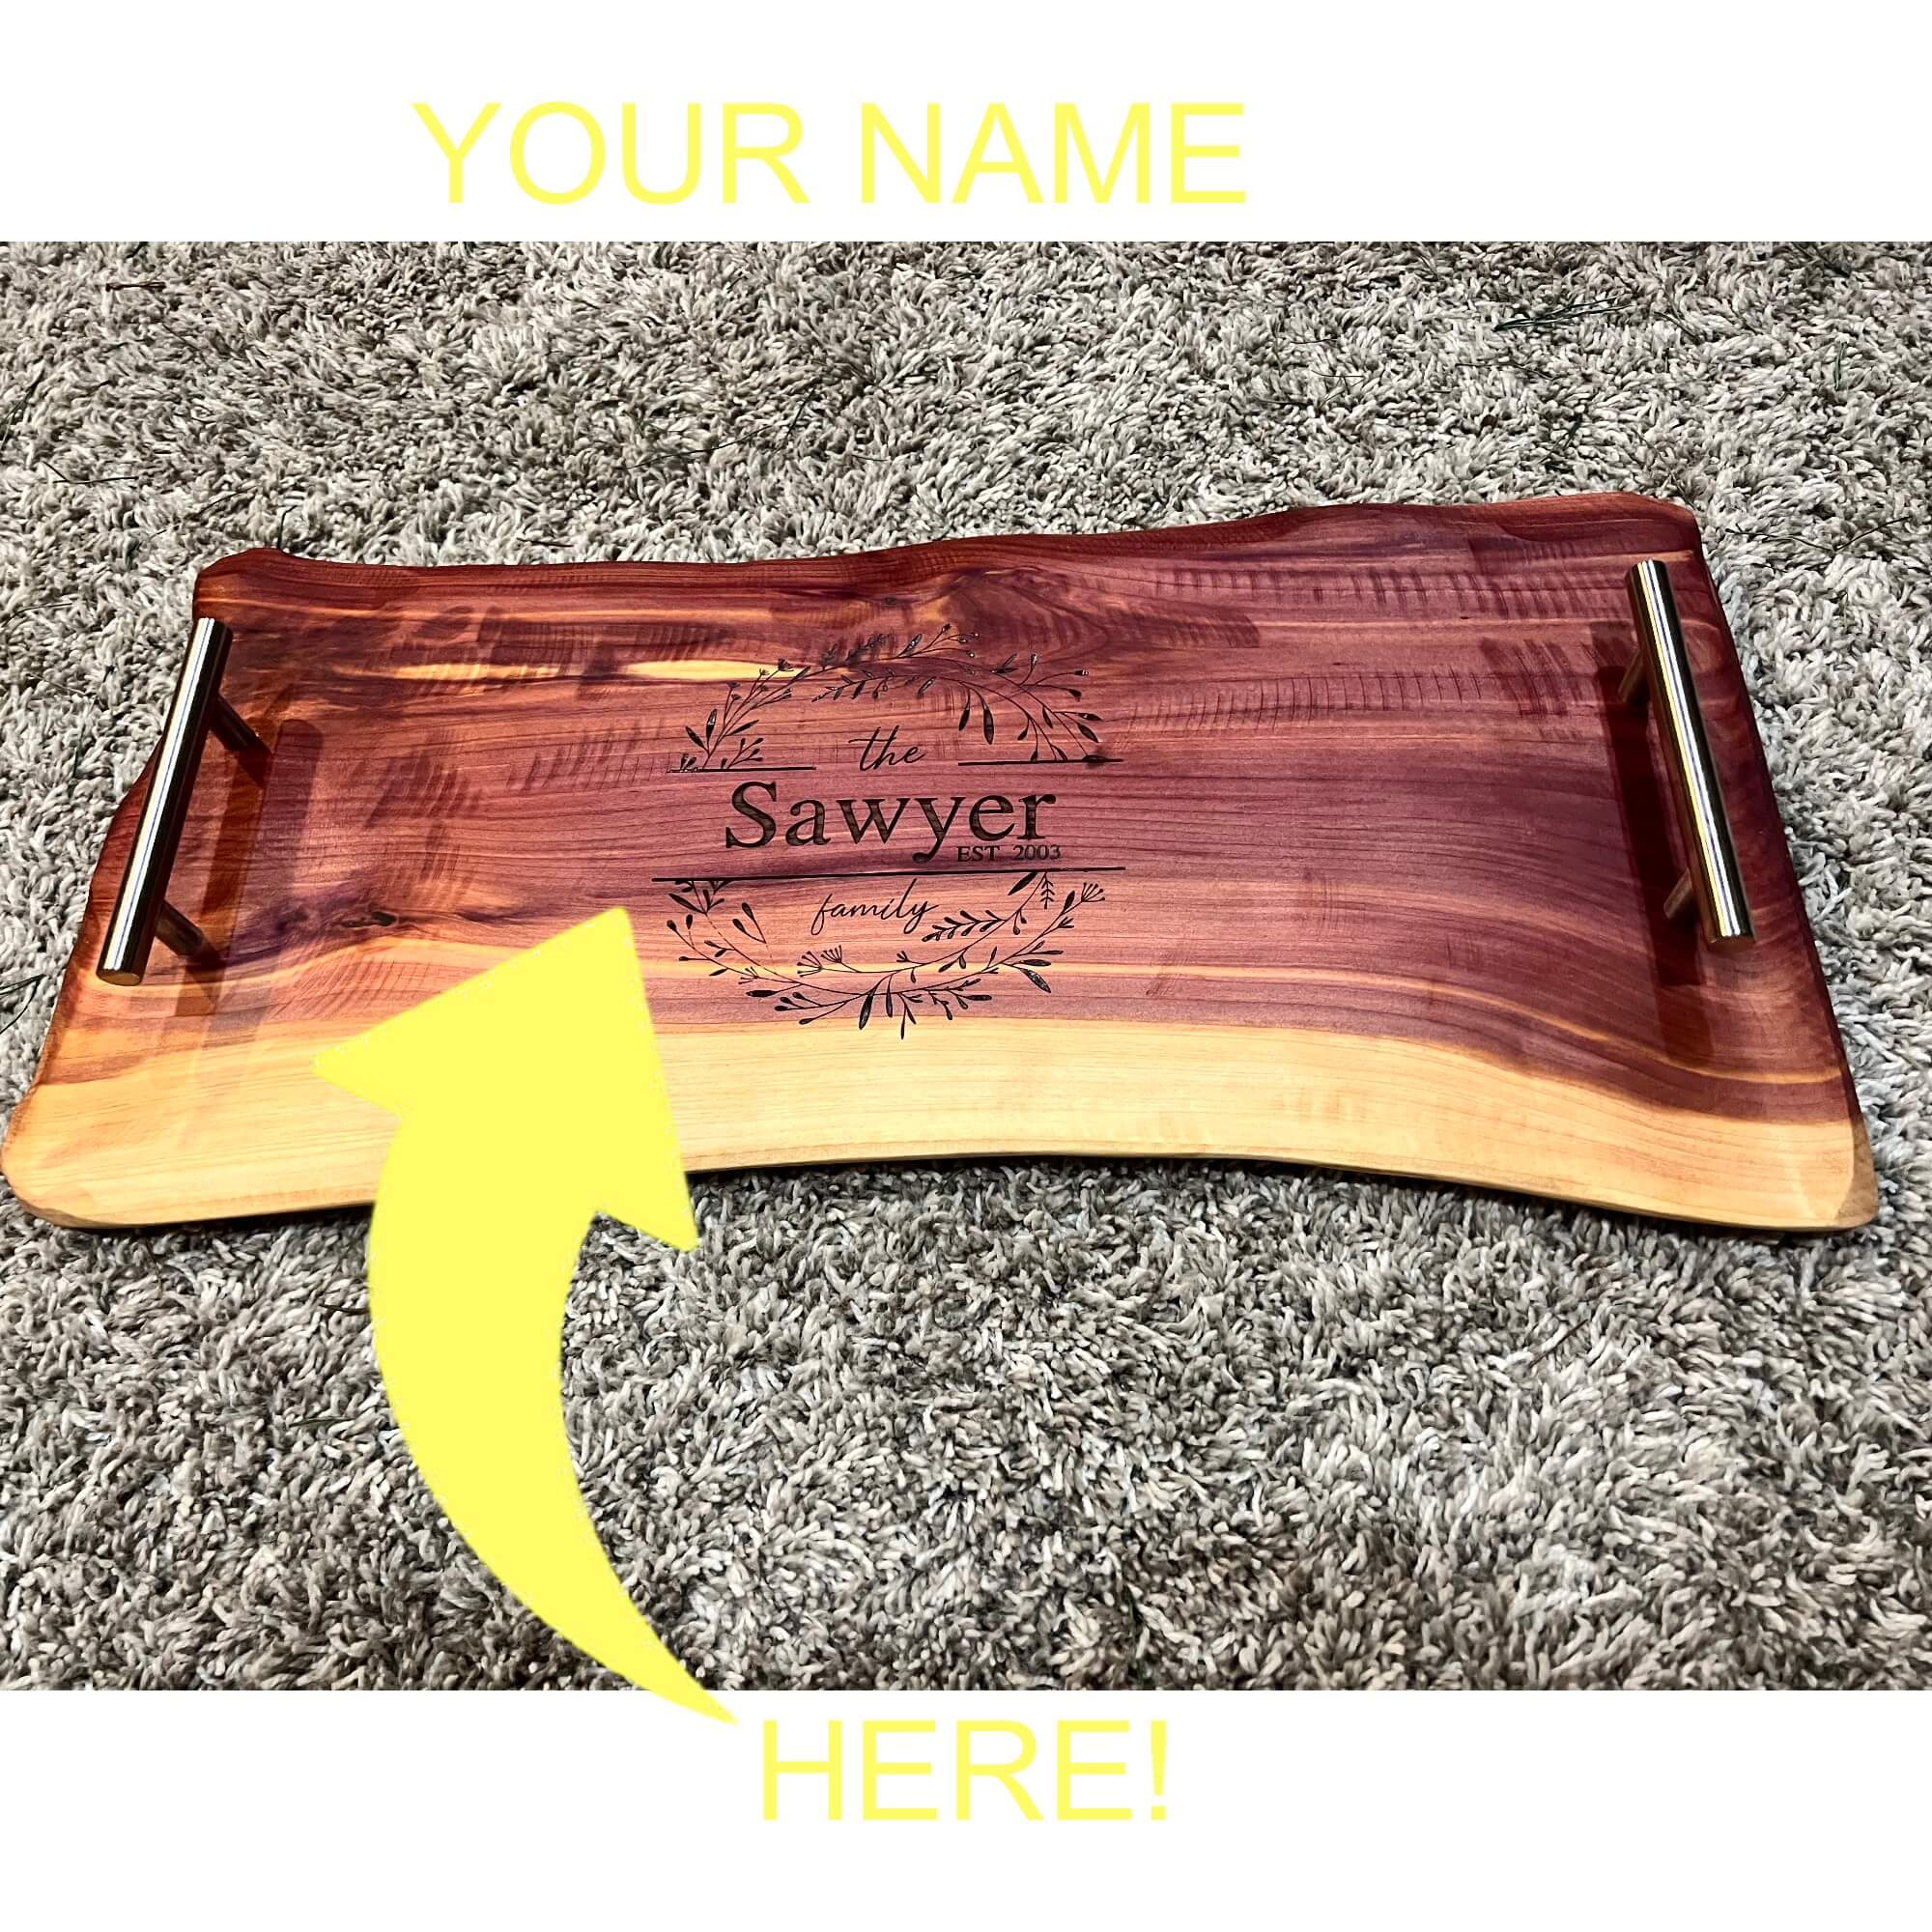 Toast to togetherness with a custom wood cutting board, engraved with your family's name and cherished date.